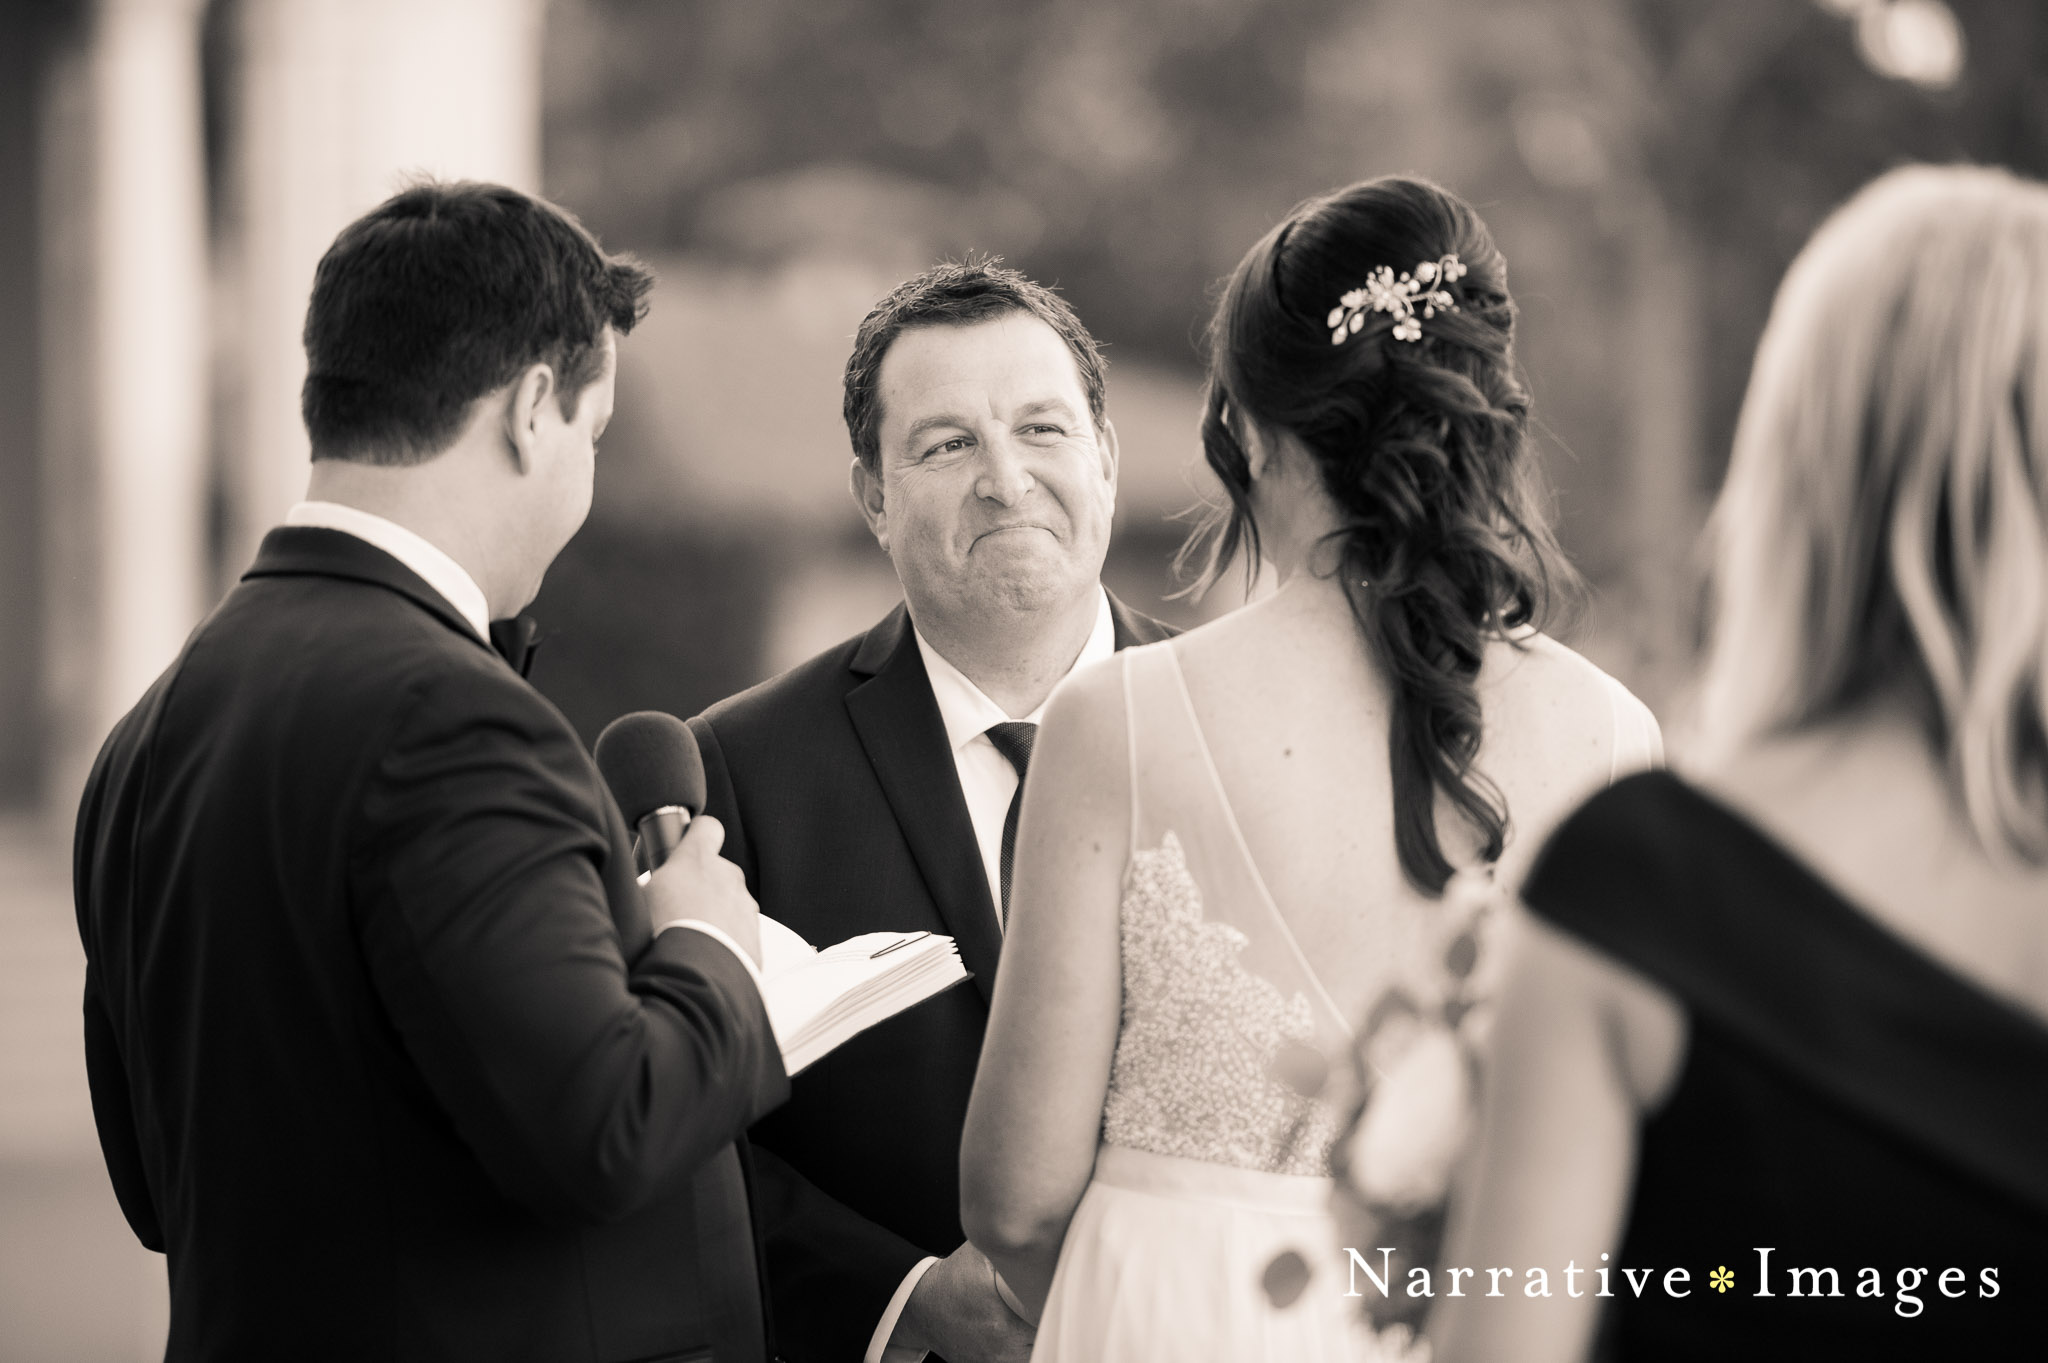 Groom looks lovingly at his bride during ceremony on stage at Spreckels Organ Pavilion 